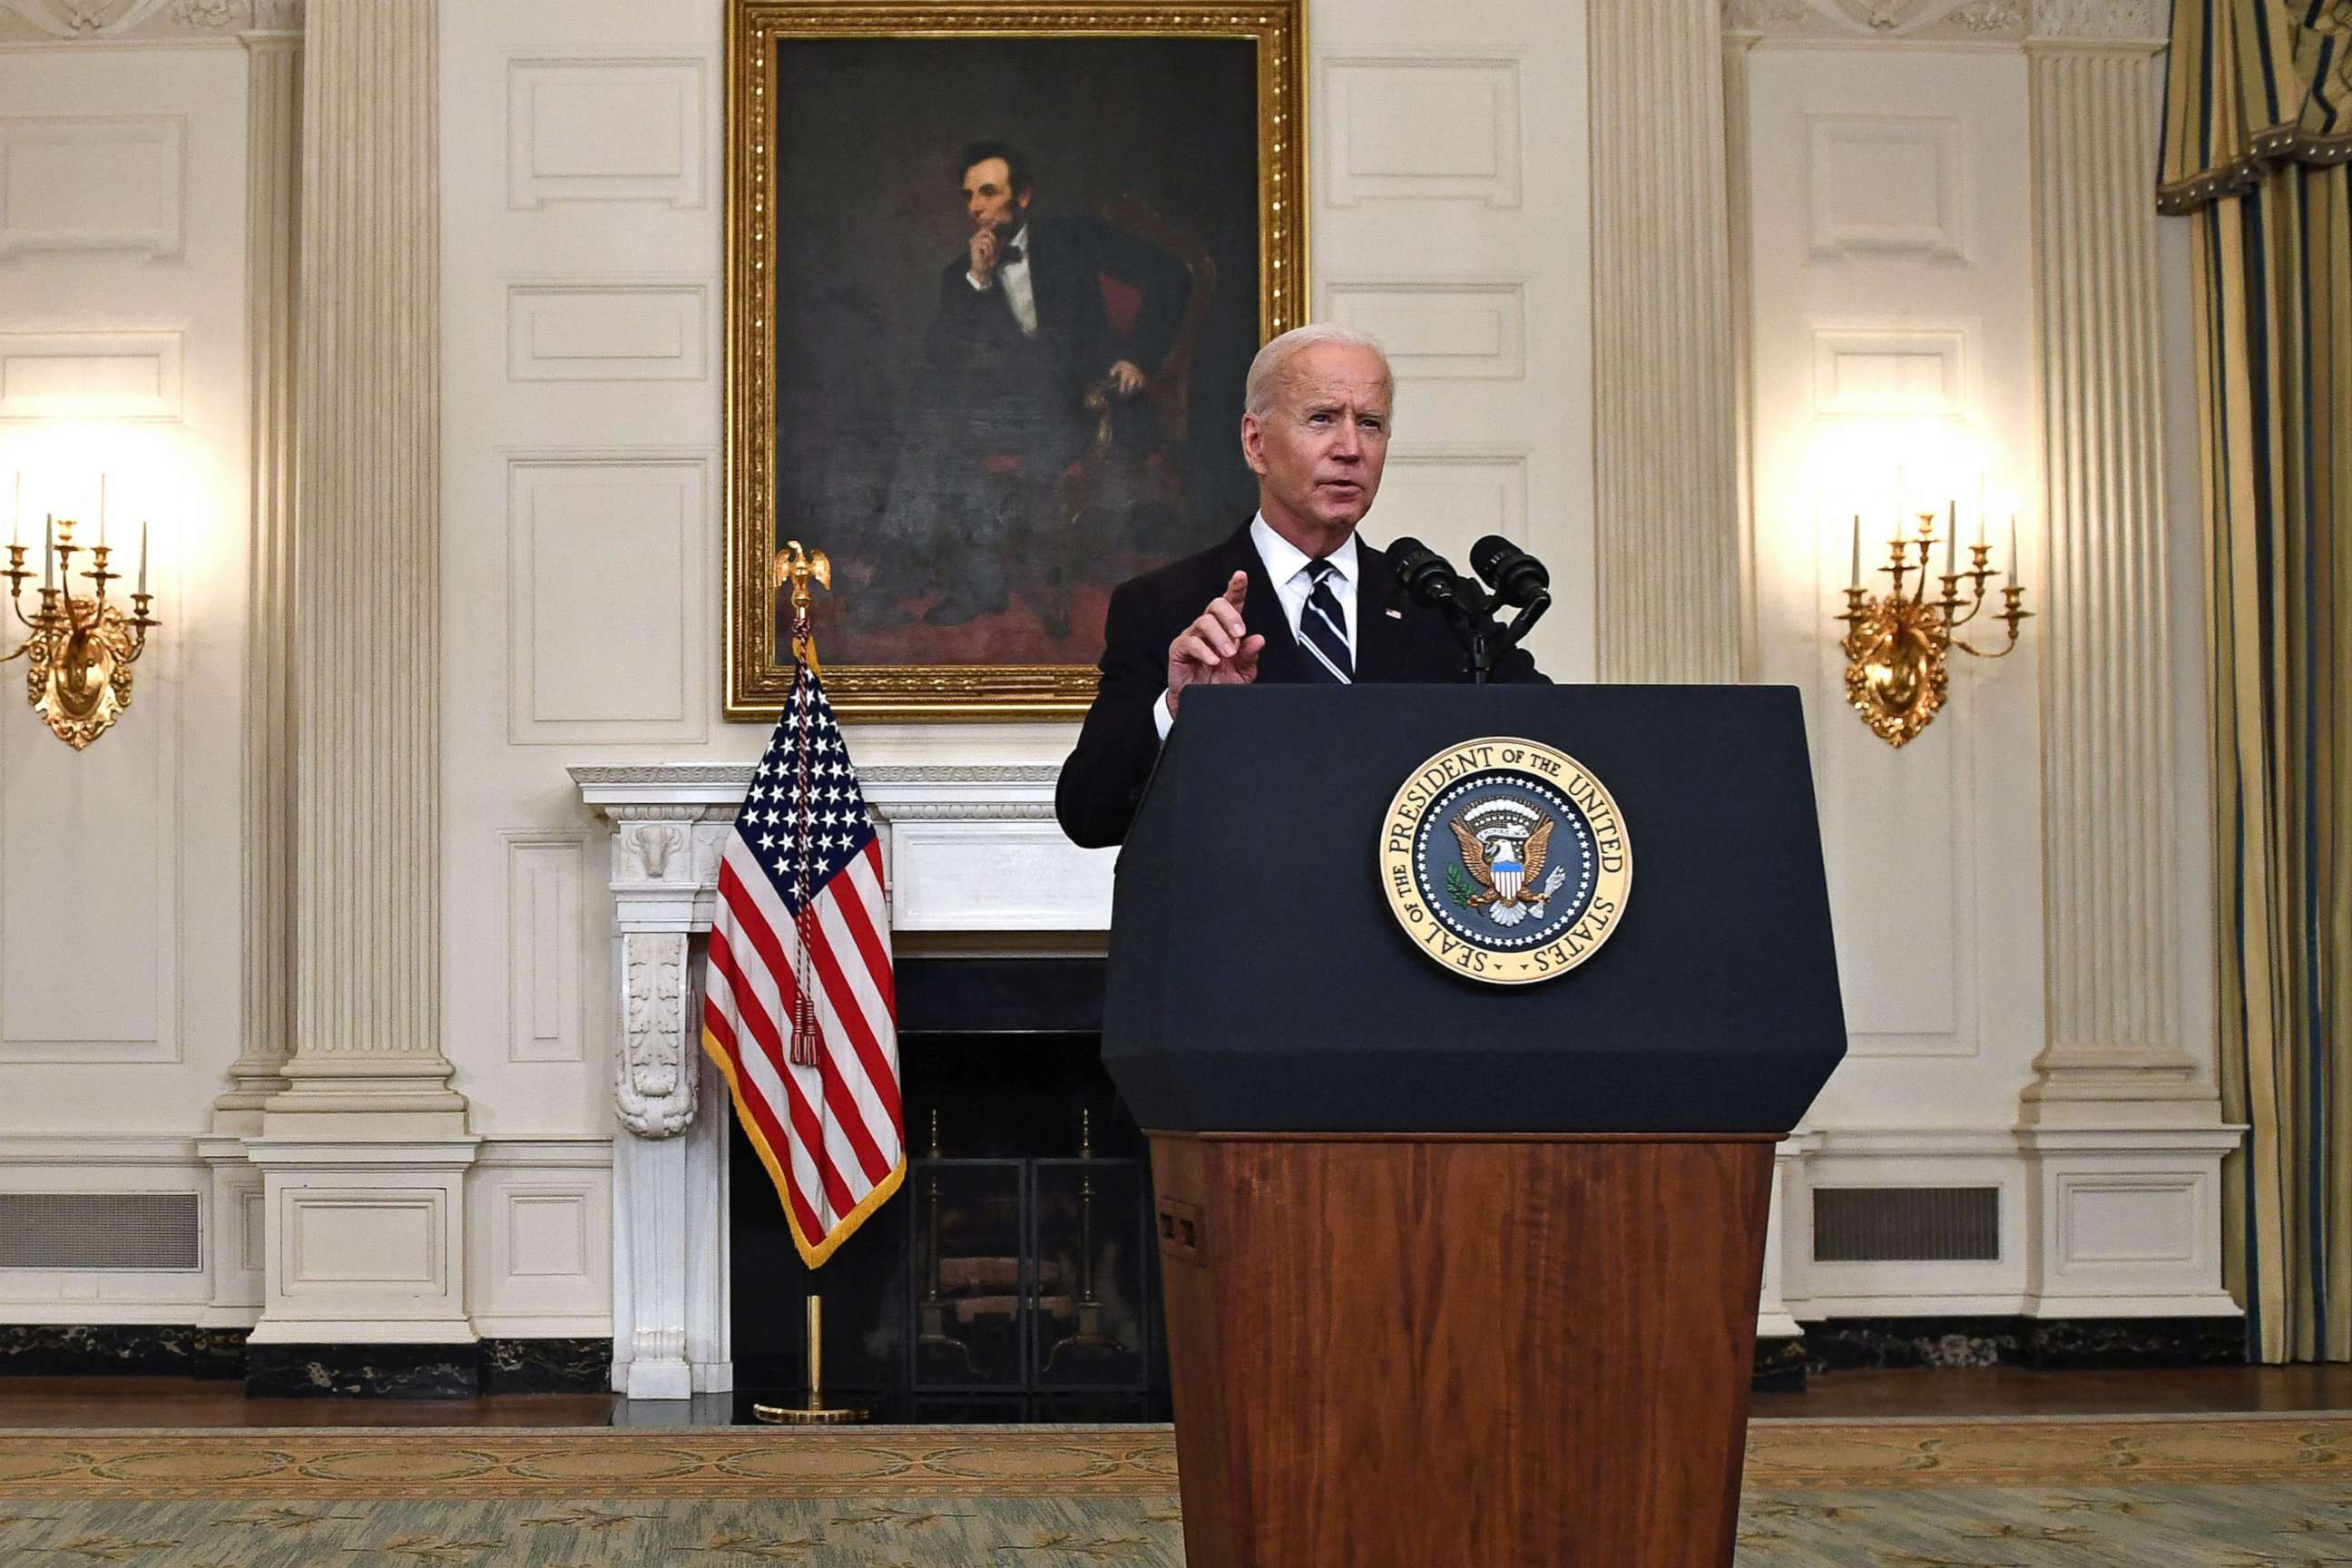 PHOTO: President Joe Biden delivers remarks on plans to stop the spread of the Delta variant and boost COVID-19 vaccinations at the State Dinning Room of the White House, in Washington, D.C., on Sept. 9, 2021.